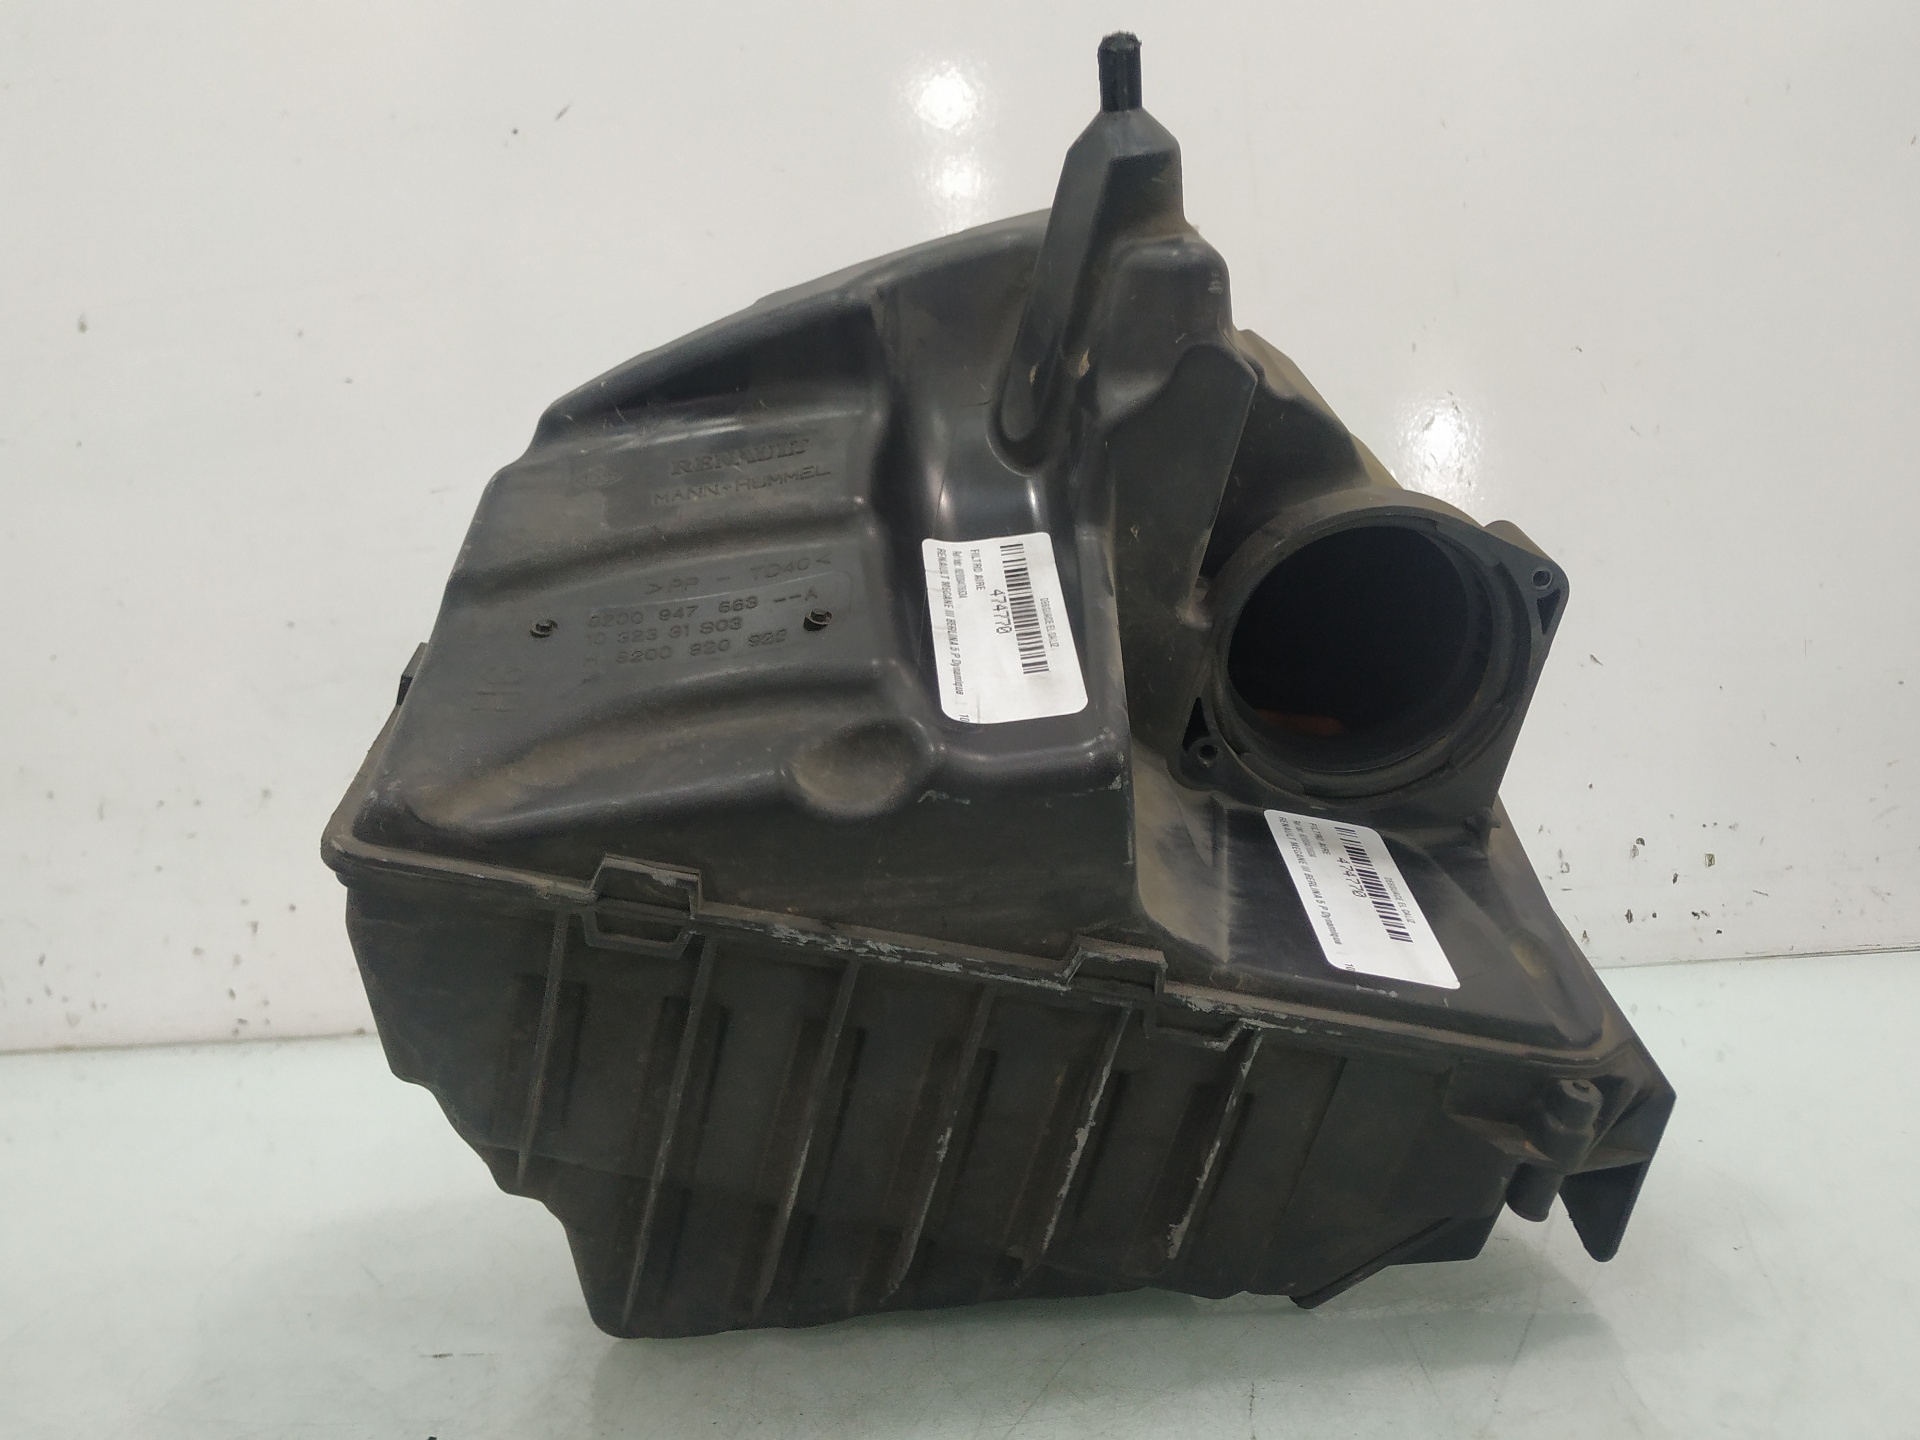 VAUXHALL Megane 3 generation (2008-2020) Other Engine Compartment Parts 8200947663A 25213176